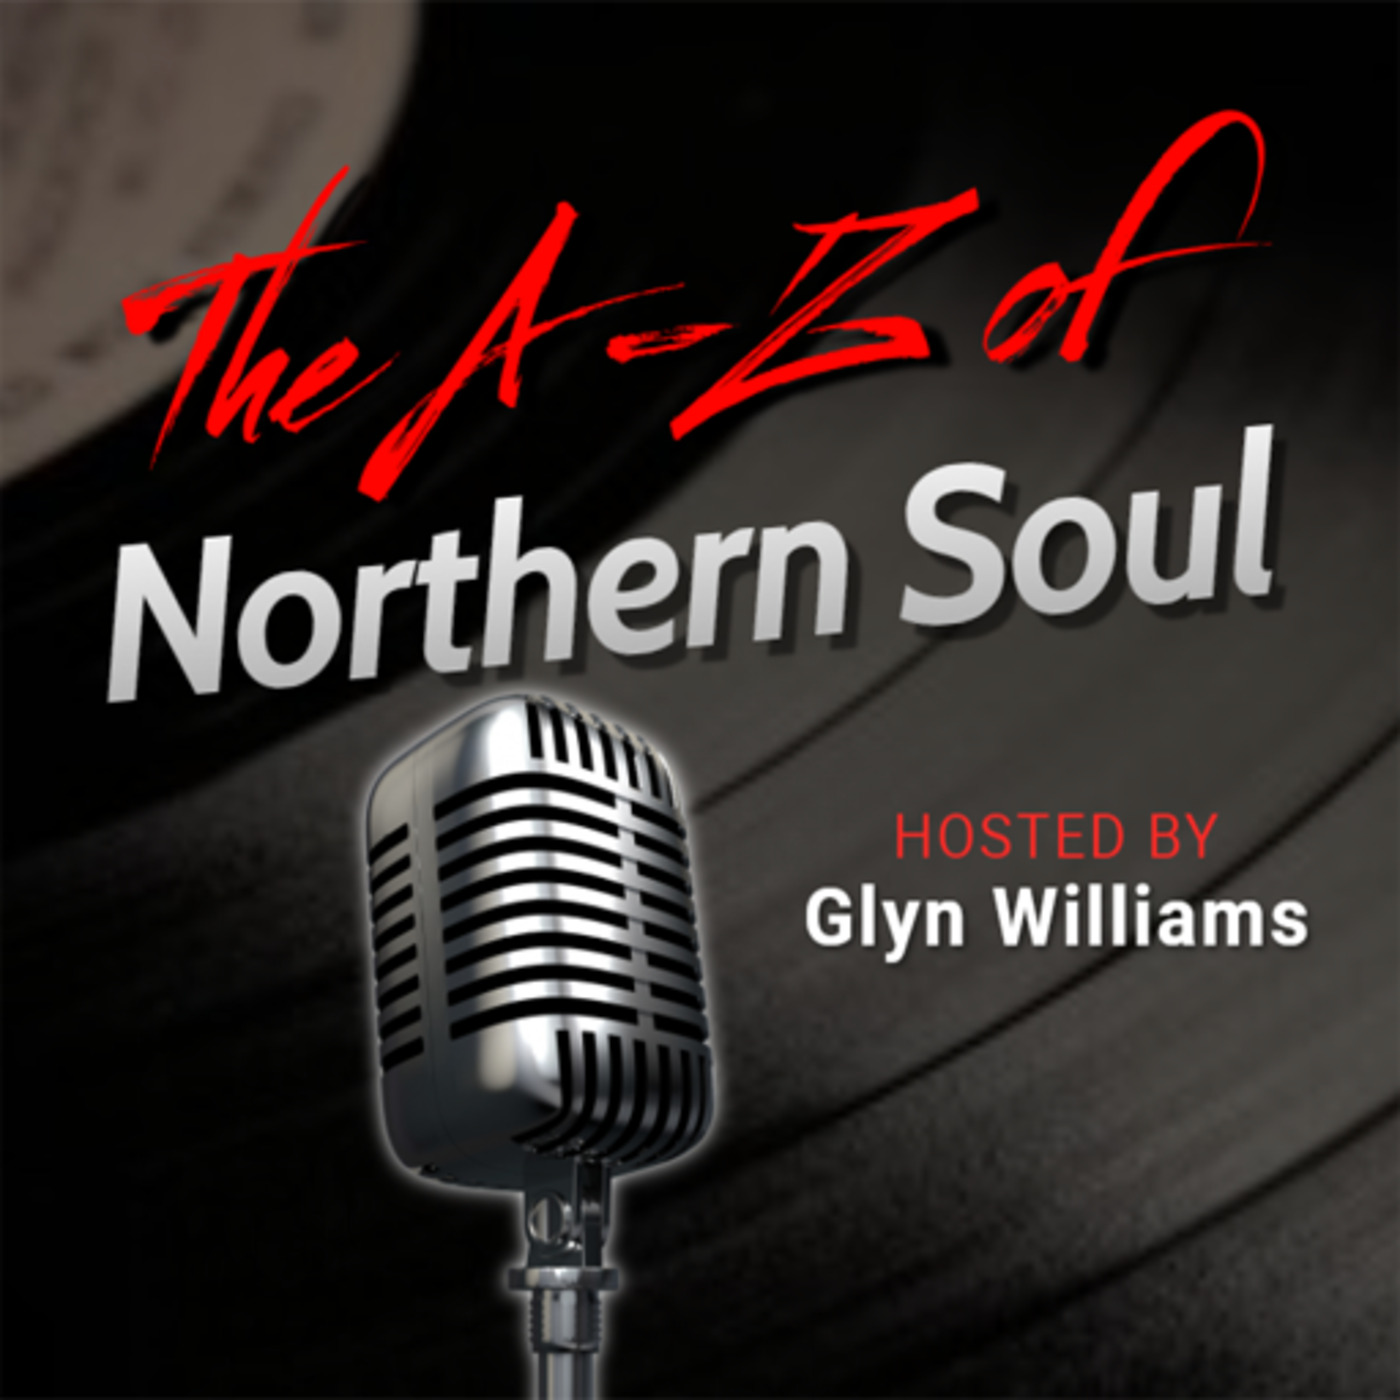 The A-Z of Northern Soul E040